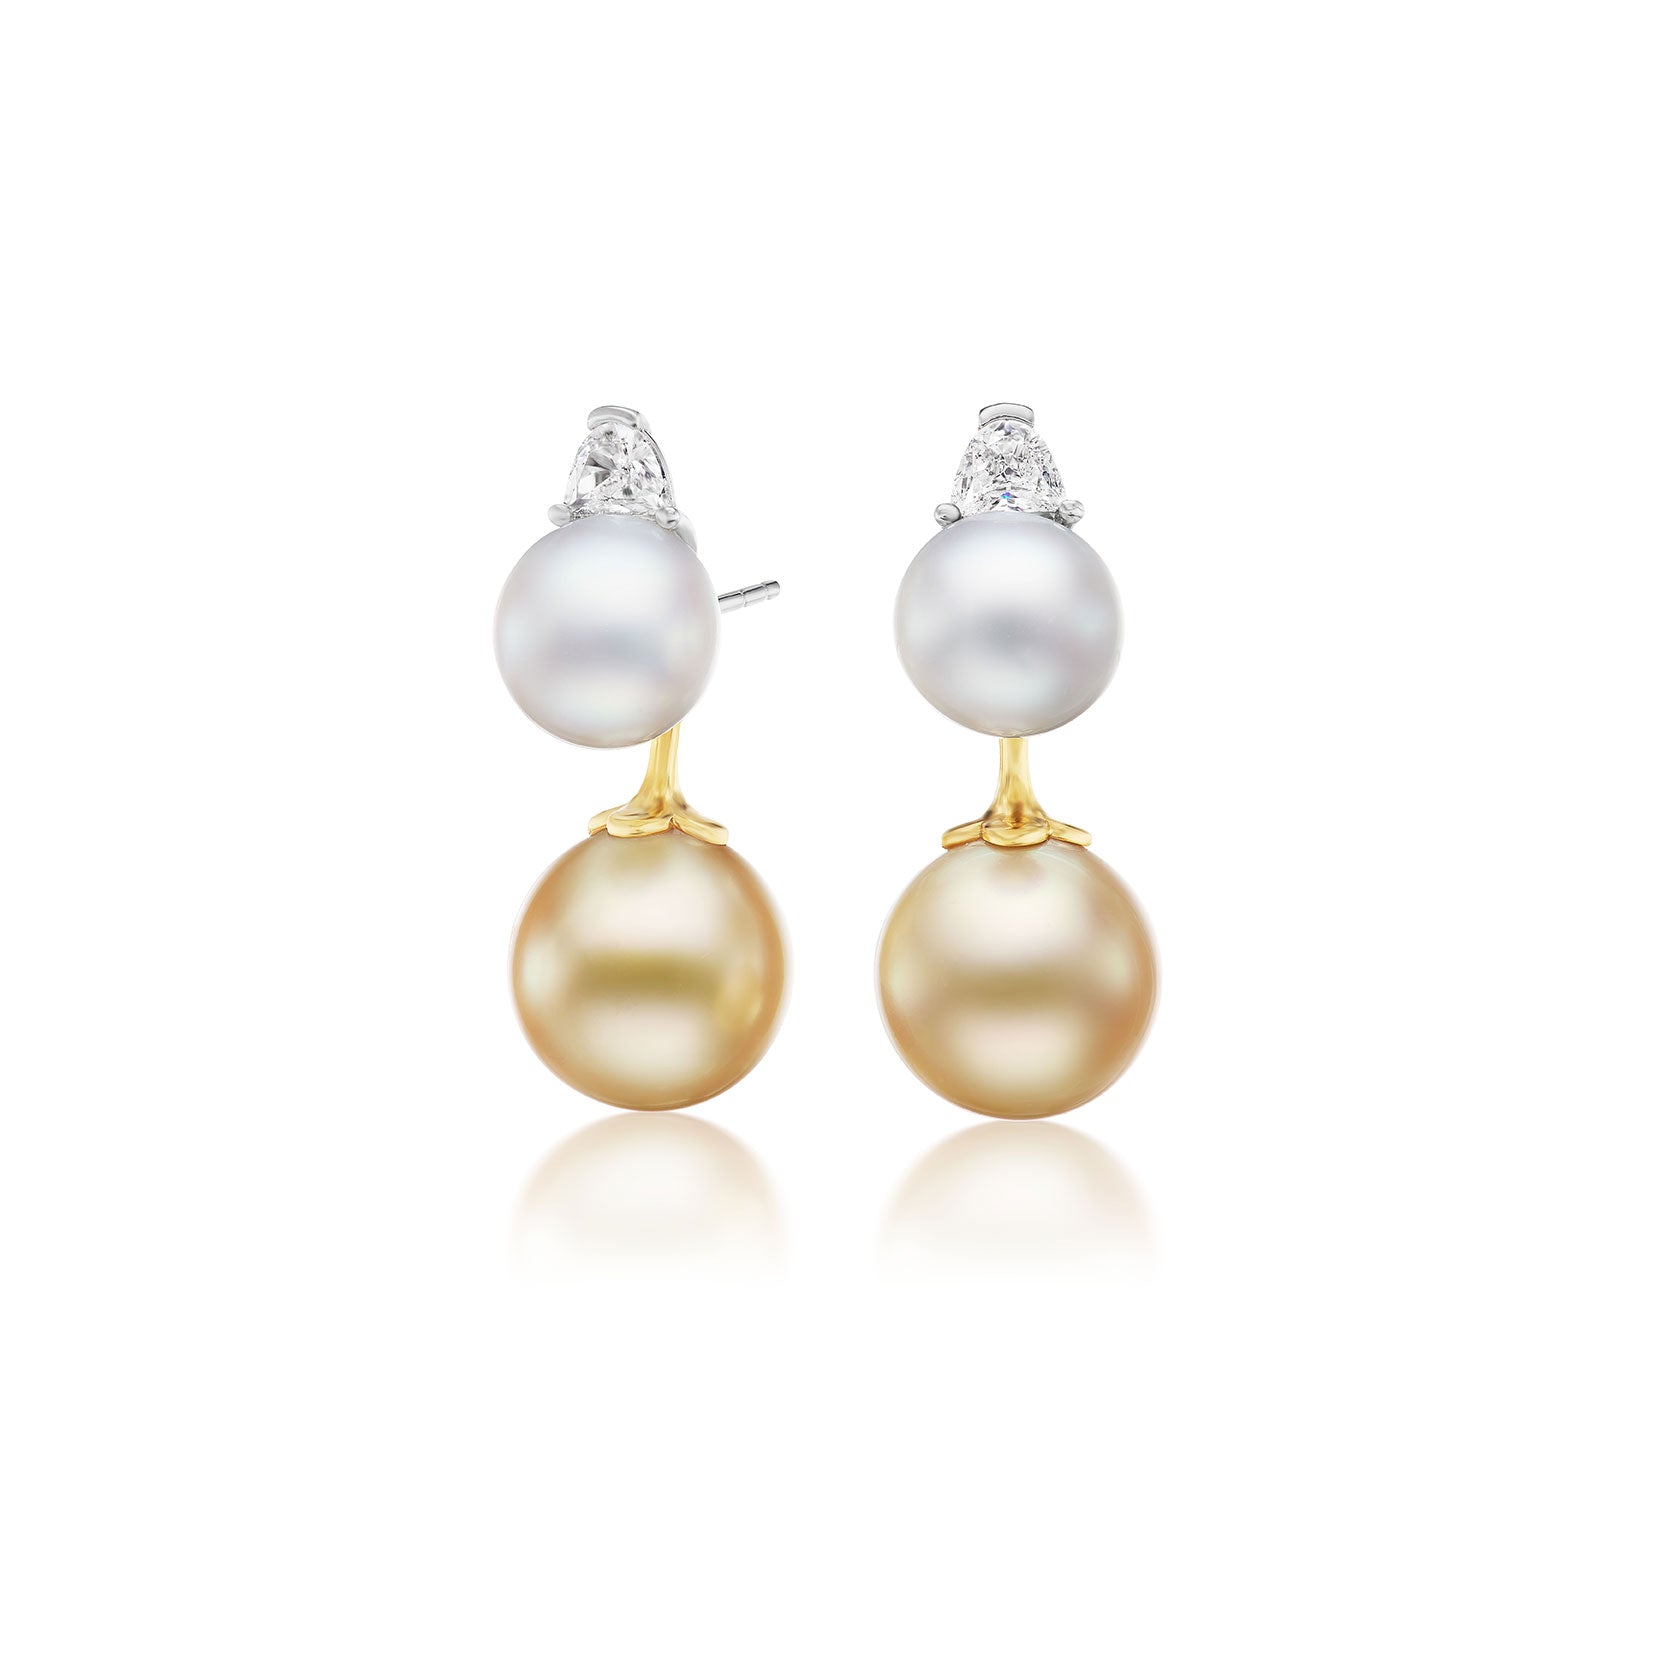 SOMERSET STUDS AND SOUTH SEA PEARL JACKETS - ANNE BAKERSOMERSET STUDS AND SOUTH SEA PEARL JACKETSANNE BAKER